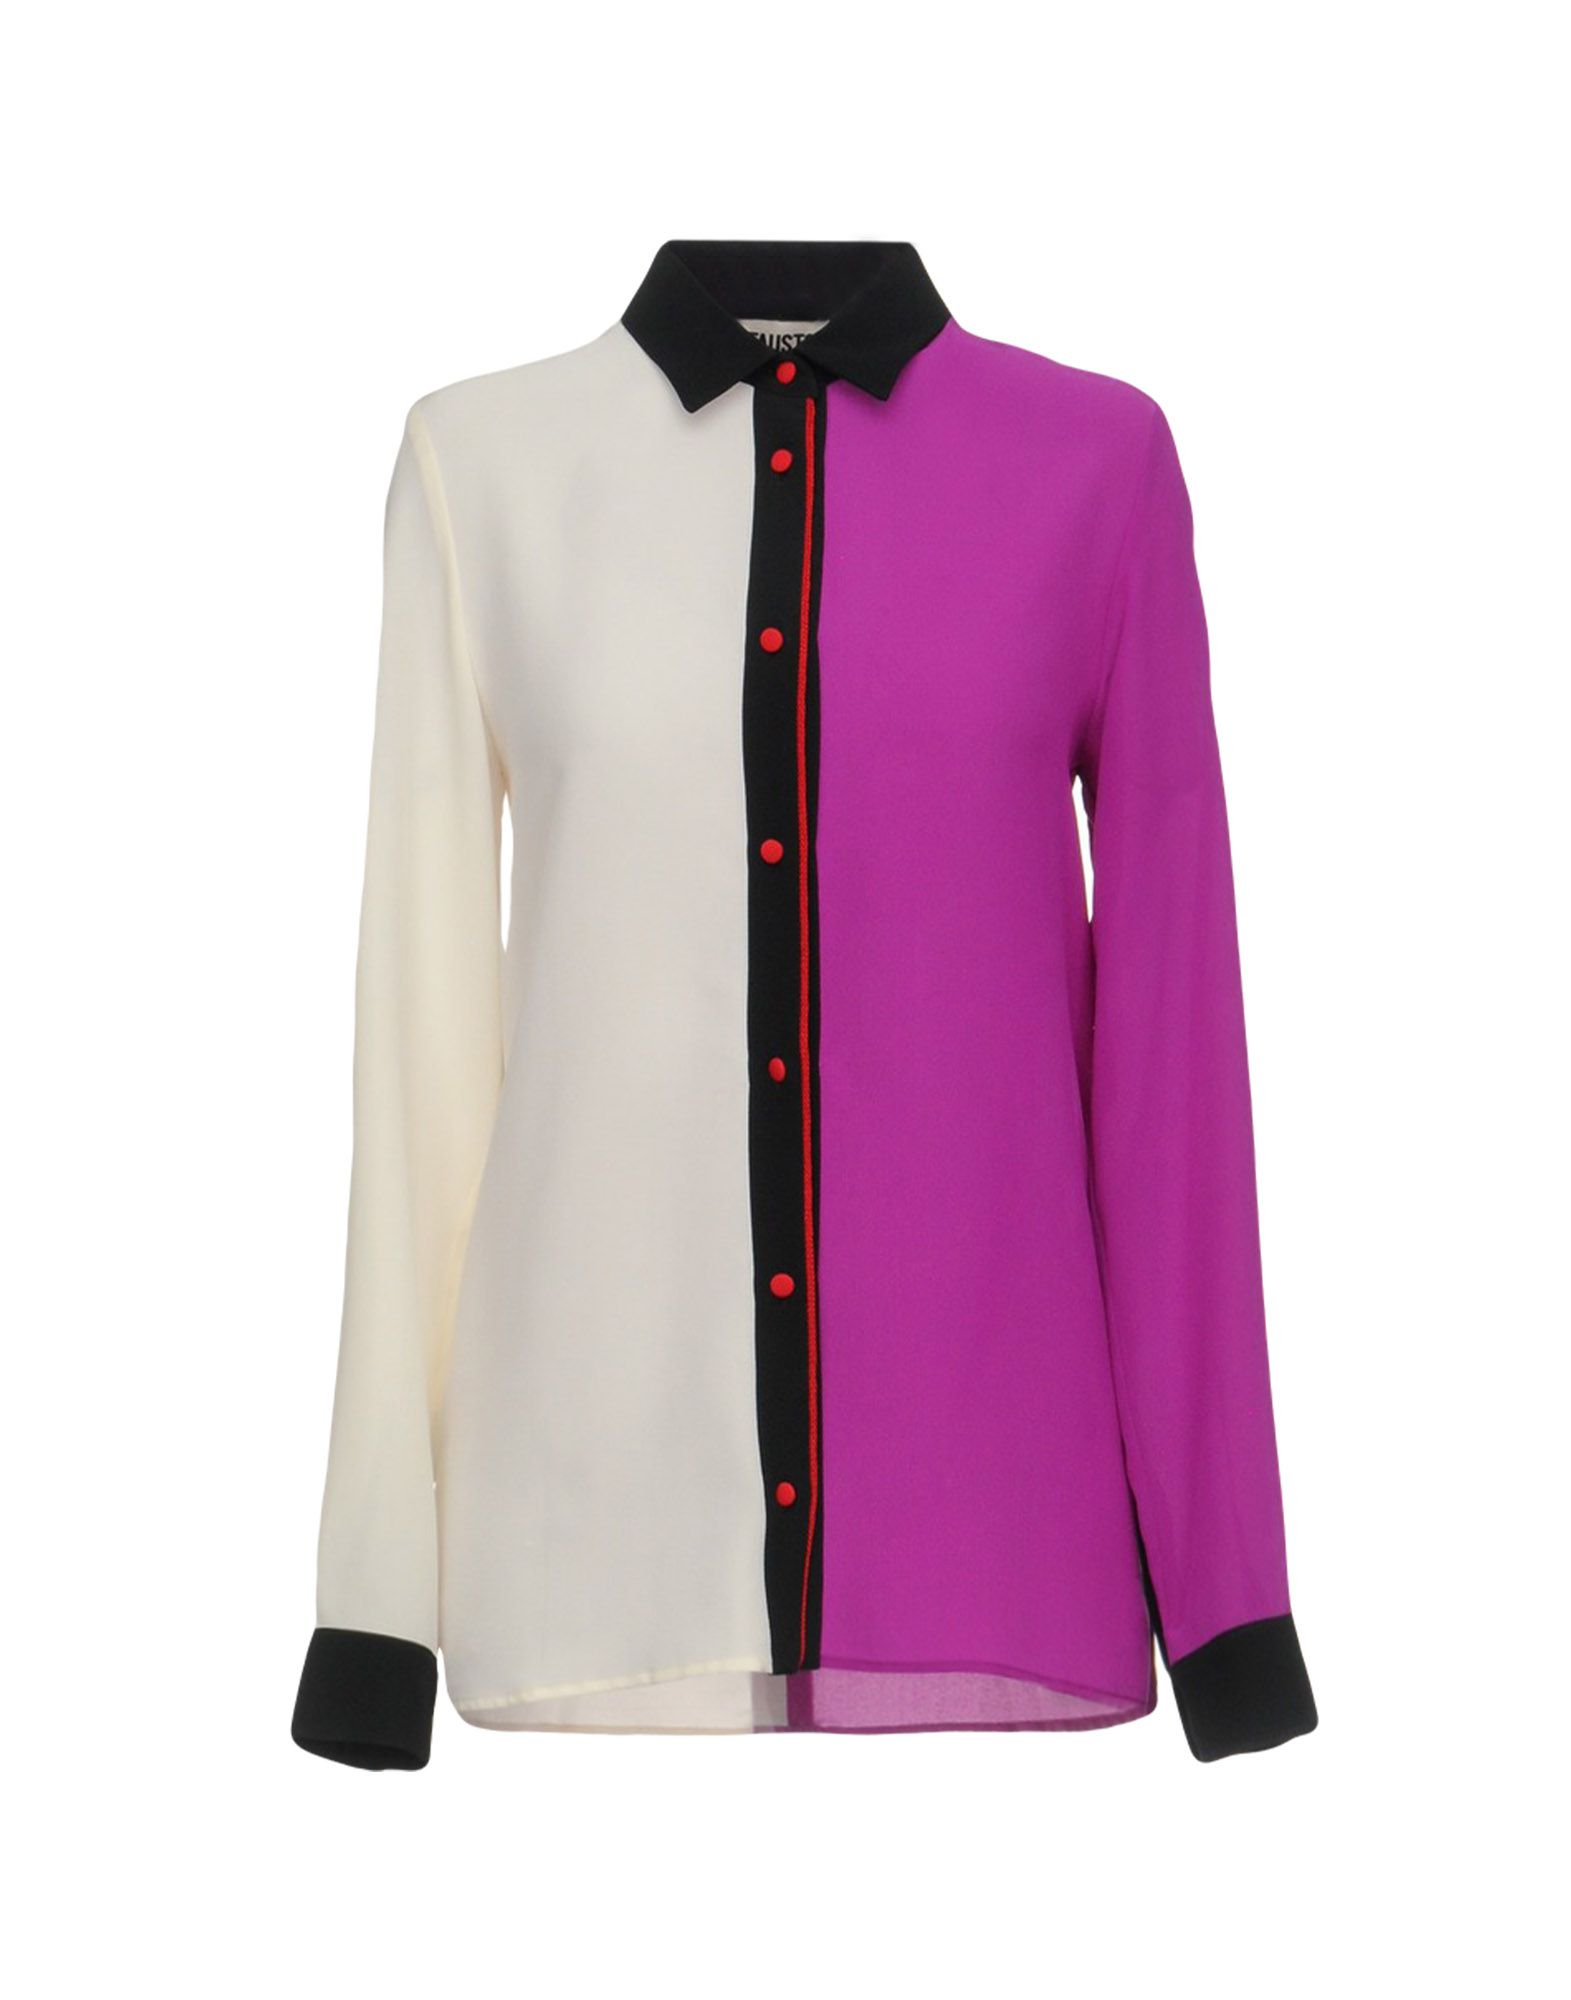 FAUSTO PUGLISI Patterned shirts & blouses,38753750CJ 5